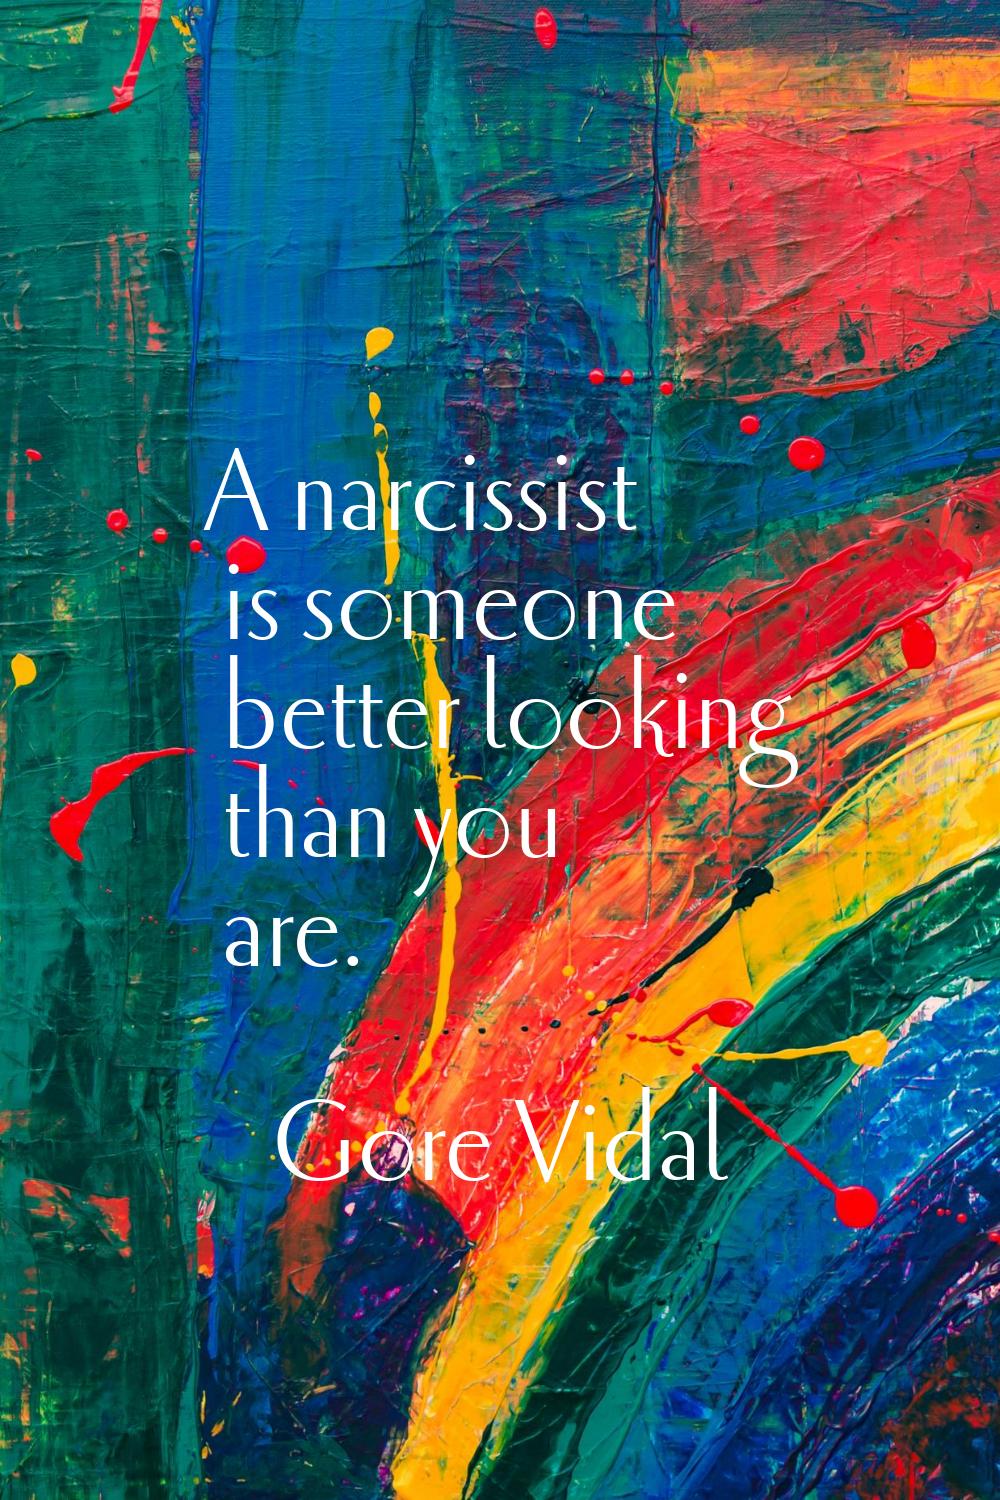 A narcissist is someone better looking than you are.